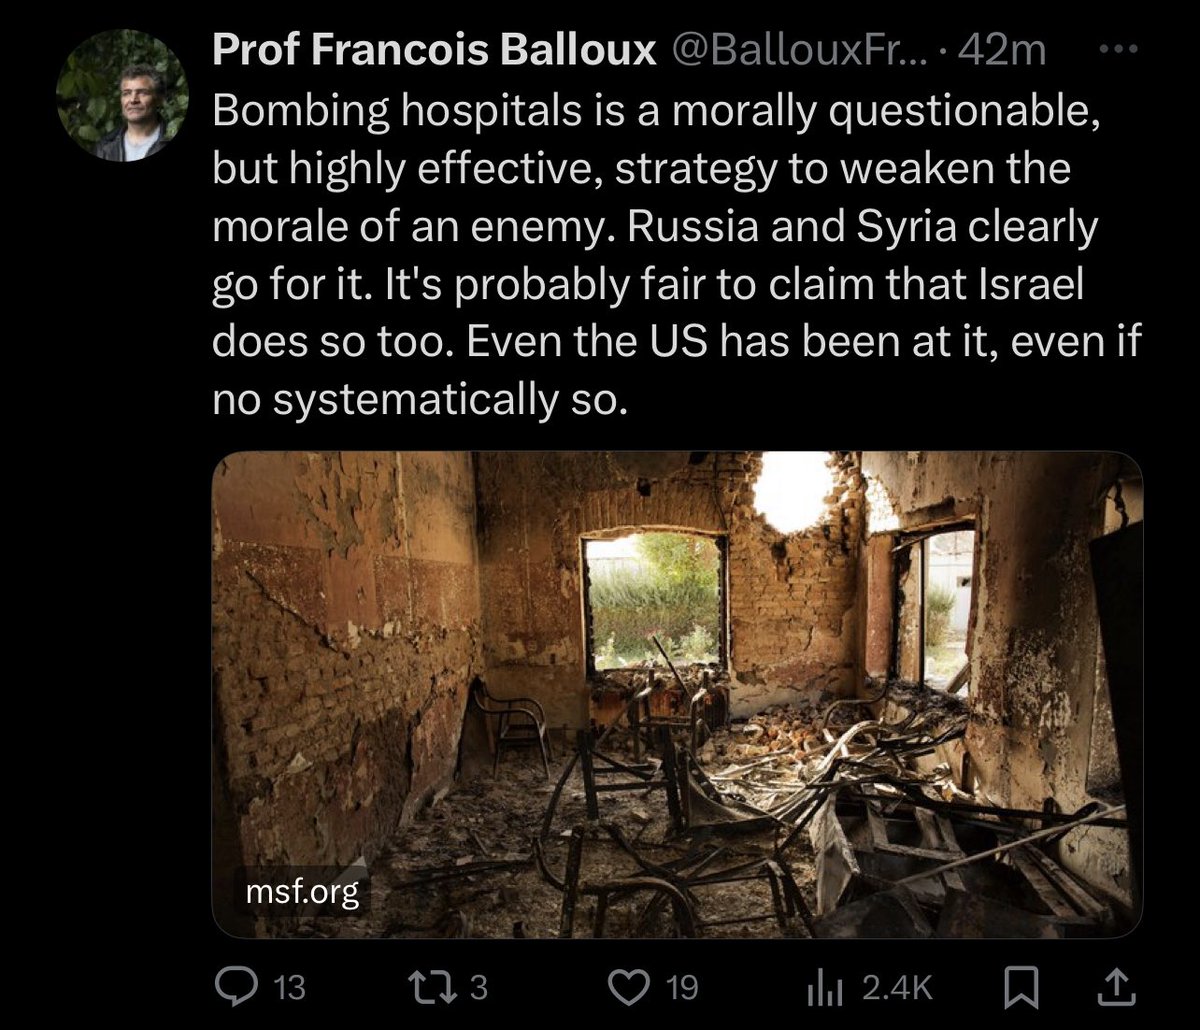 @BallouxFrancois It’s probable to assume Israel bombed a hospital to weaken the moral of the enemy. How long until he erases this tweet and is forced to apologise?